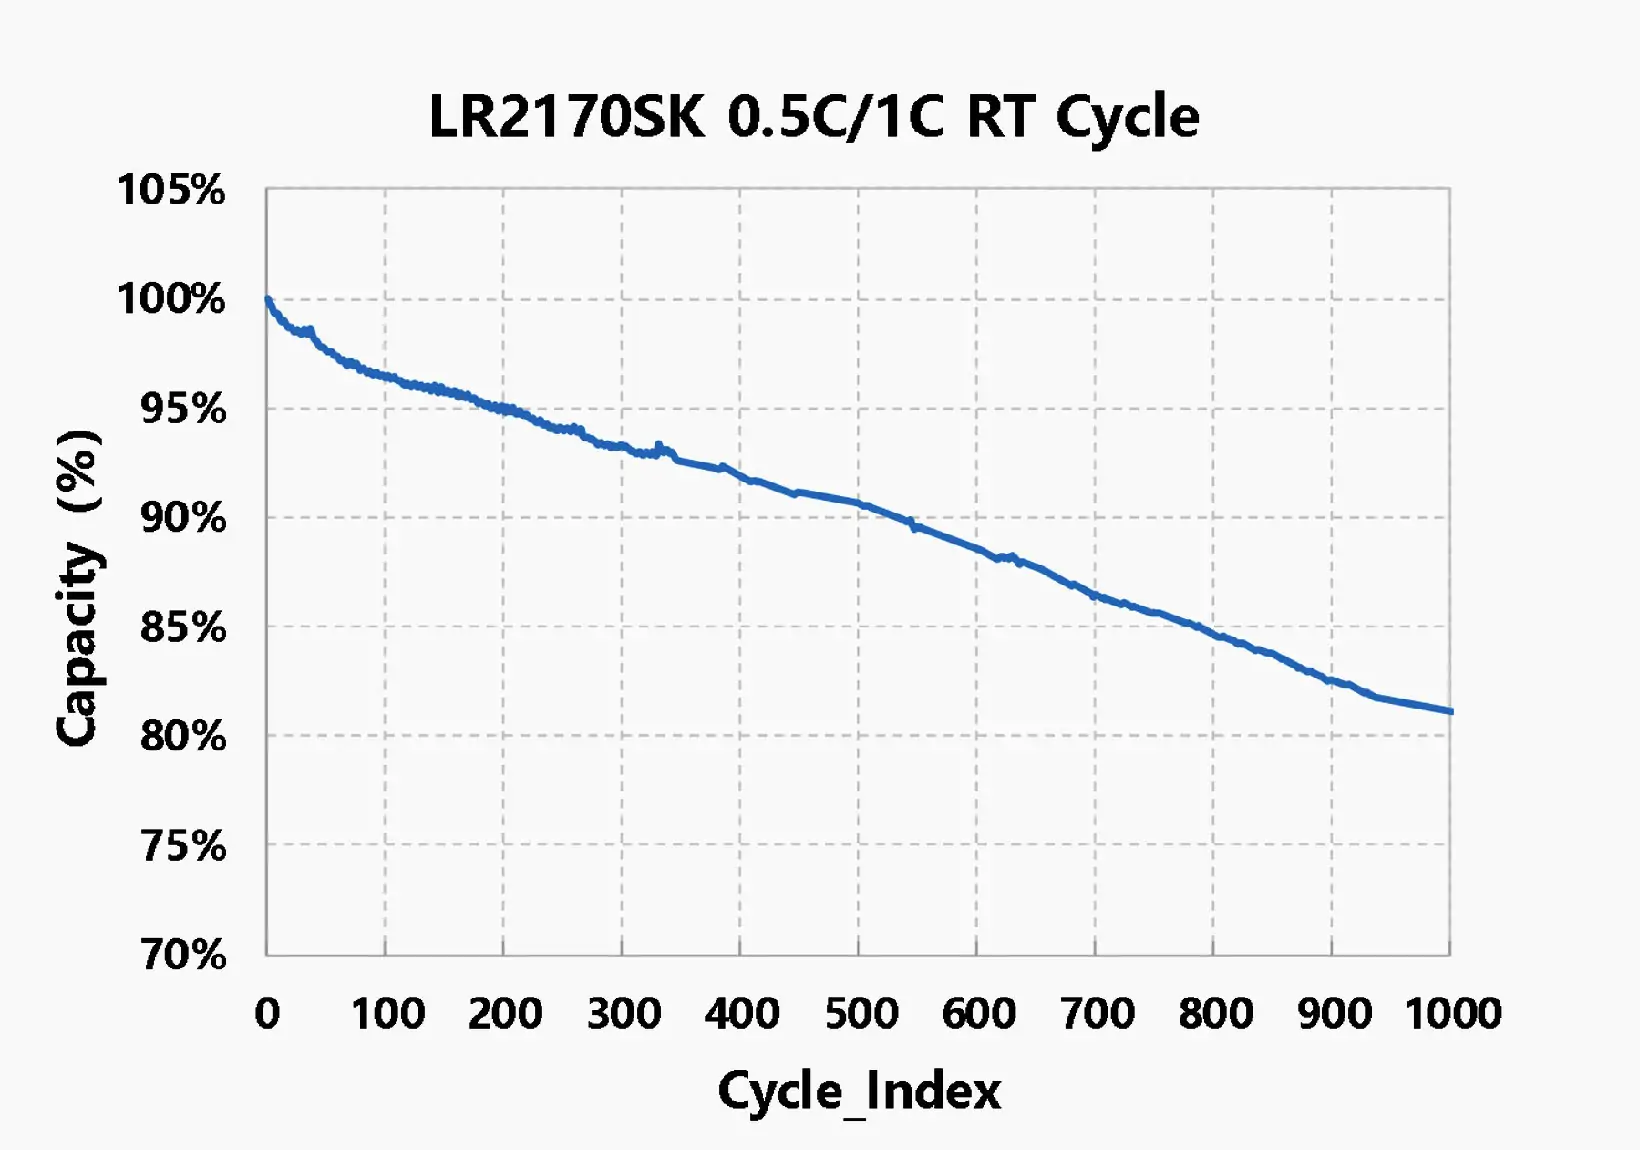 lr2170sk 05C1C RT cycle curve